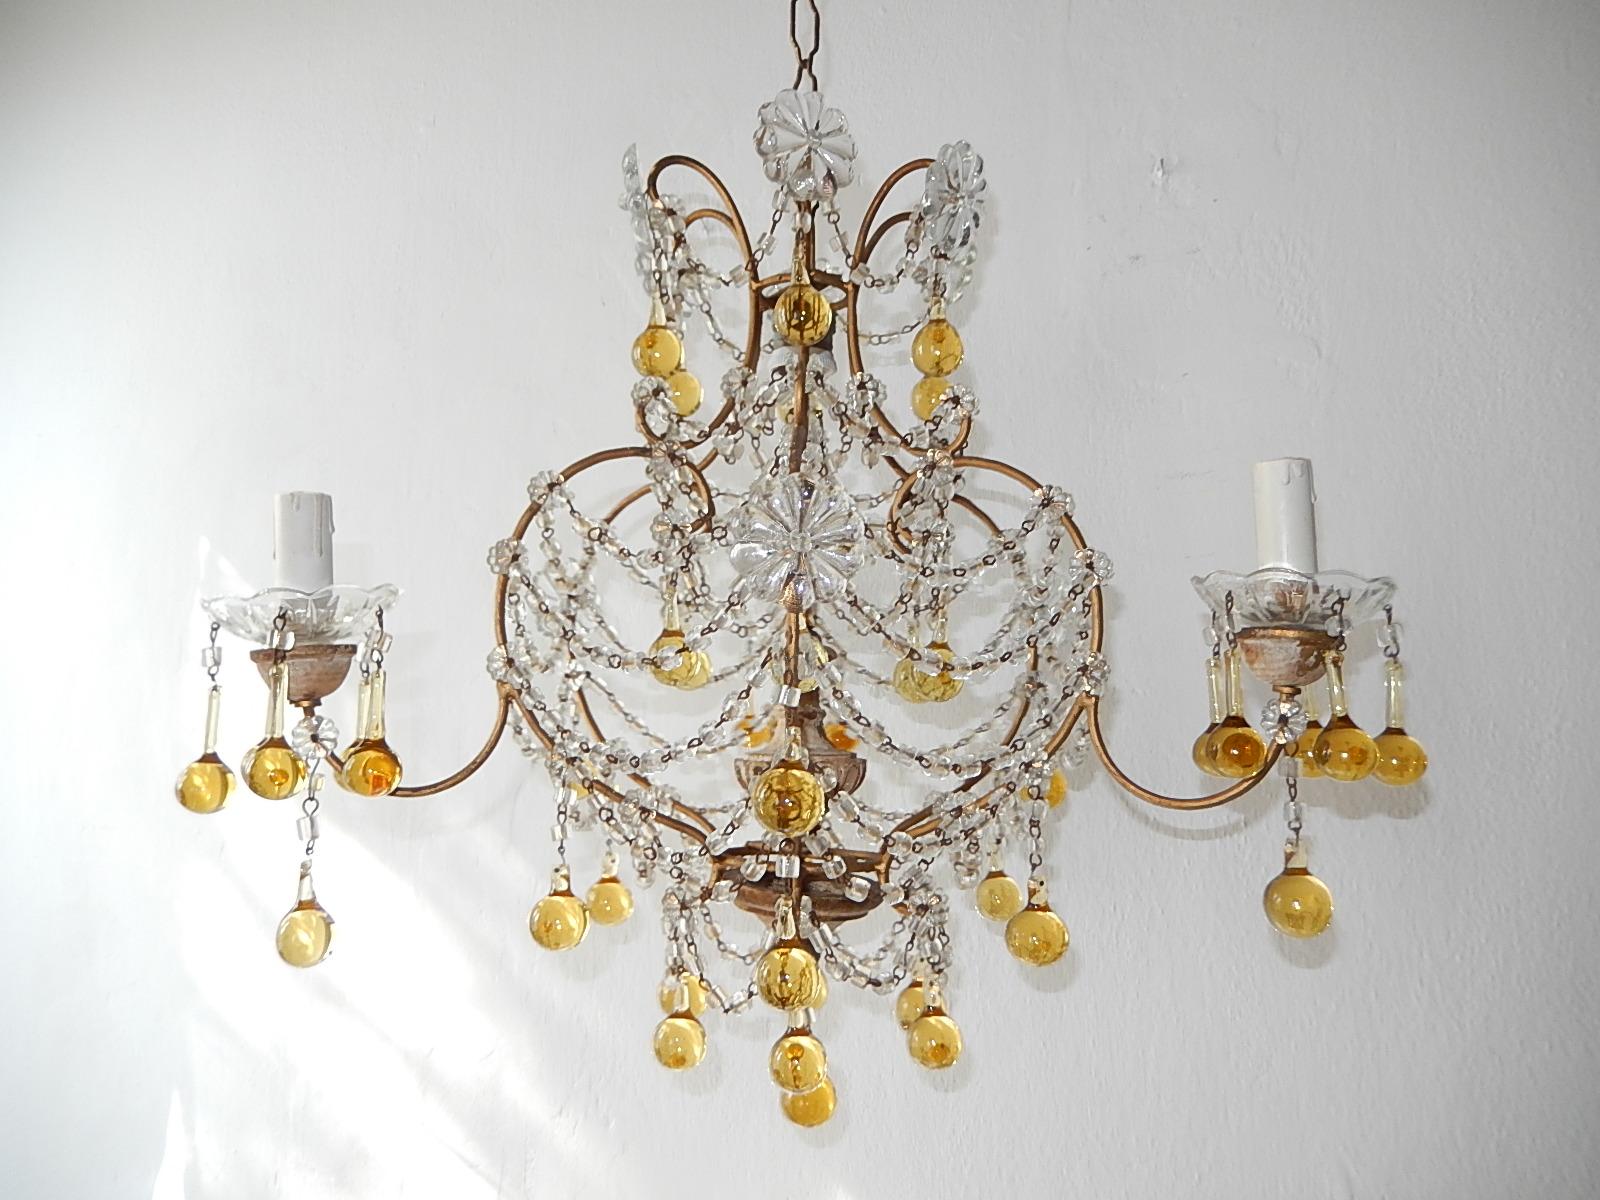 Housing four lights total. One light in centre top. The three encircling sit on wood posts and crystal bobeches dripping with champagne color Murano drops.  Gilt metal with glass florets and macaroni beading swags. Many champagne bulbous Murano